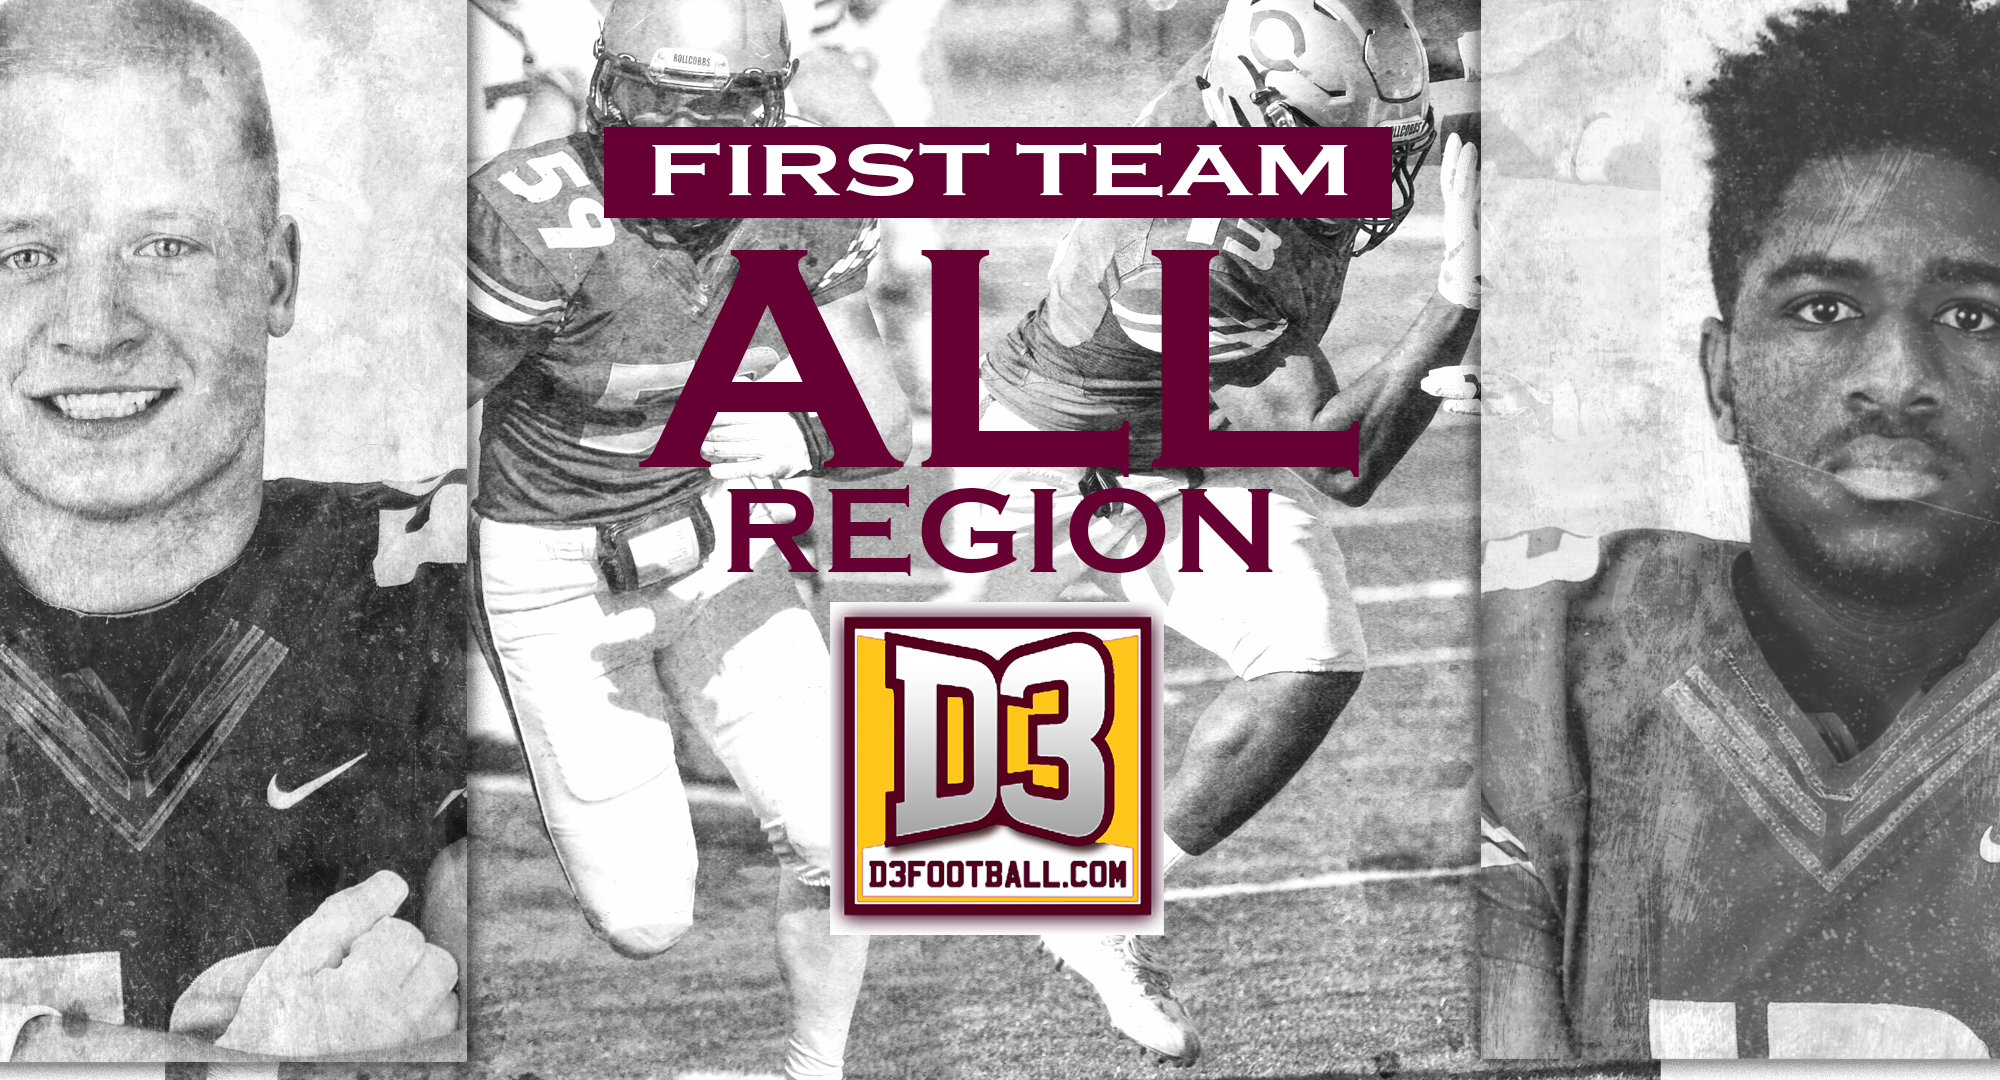 Alex Berg (L) and Willie Julkes both earned D3football.com All-West Region honors.